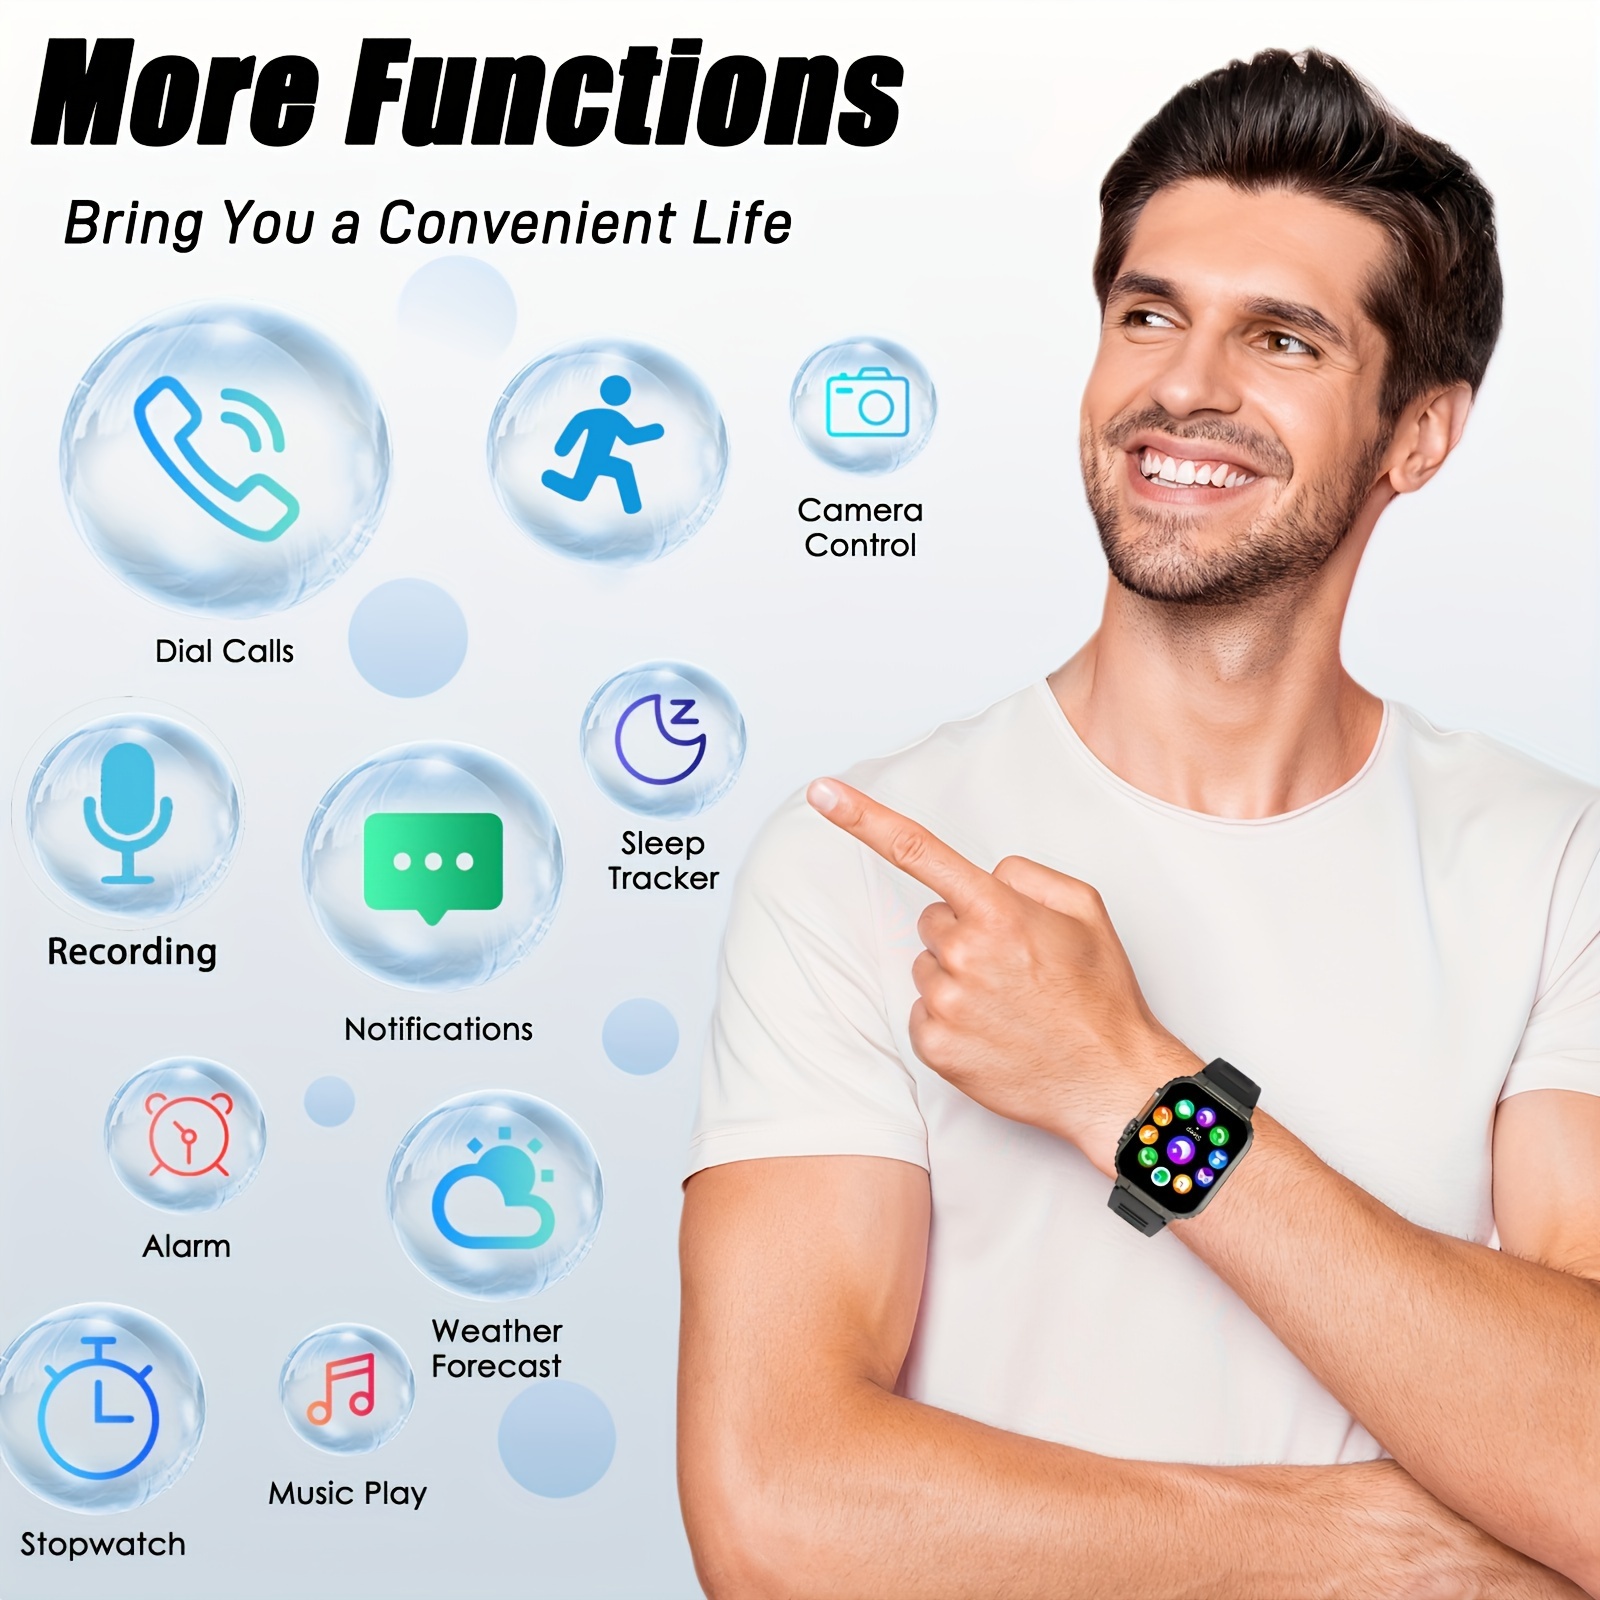 IP68 Water Proof Smart Watch with Touch Control, Heart Rate